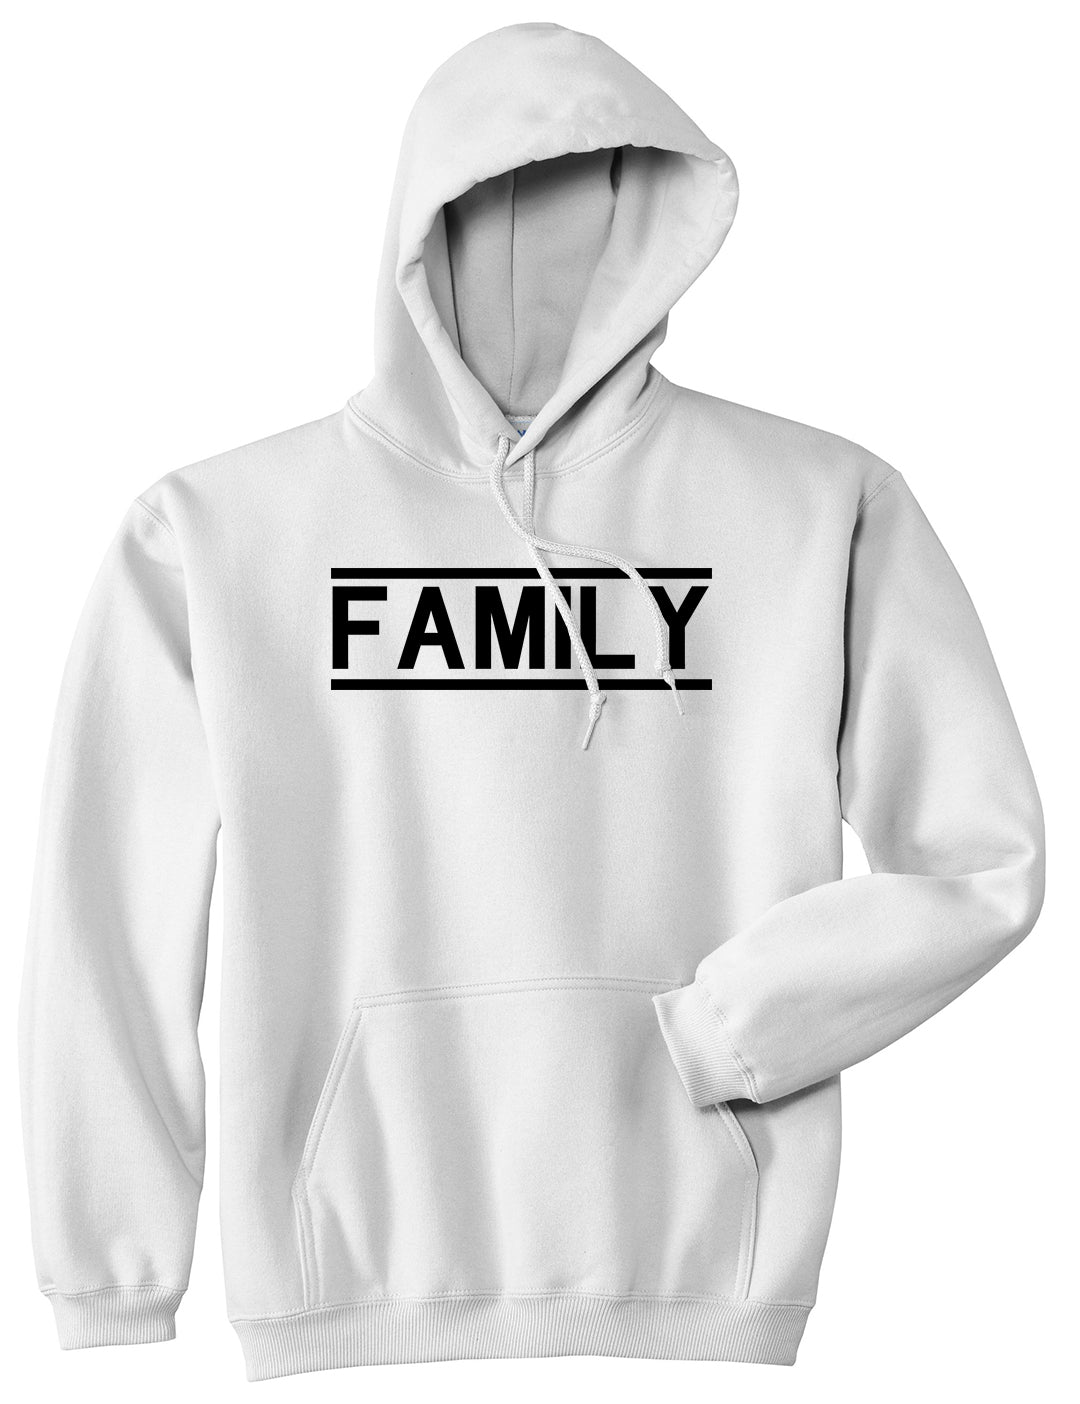 Family Fam Squad Mens White Pullover Hoodie by KINGS OF NY